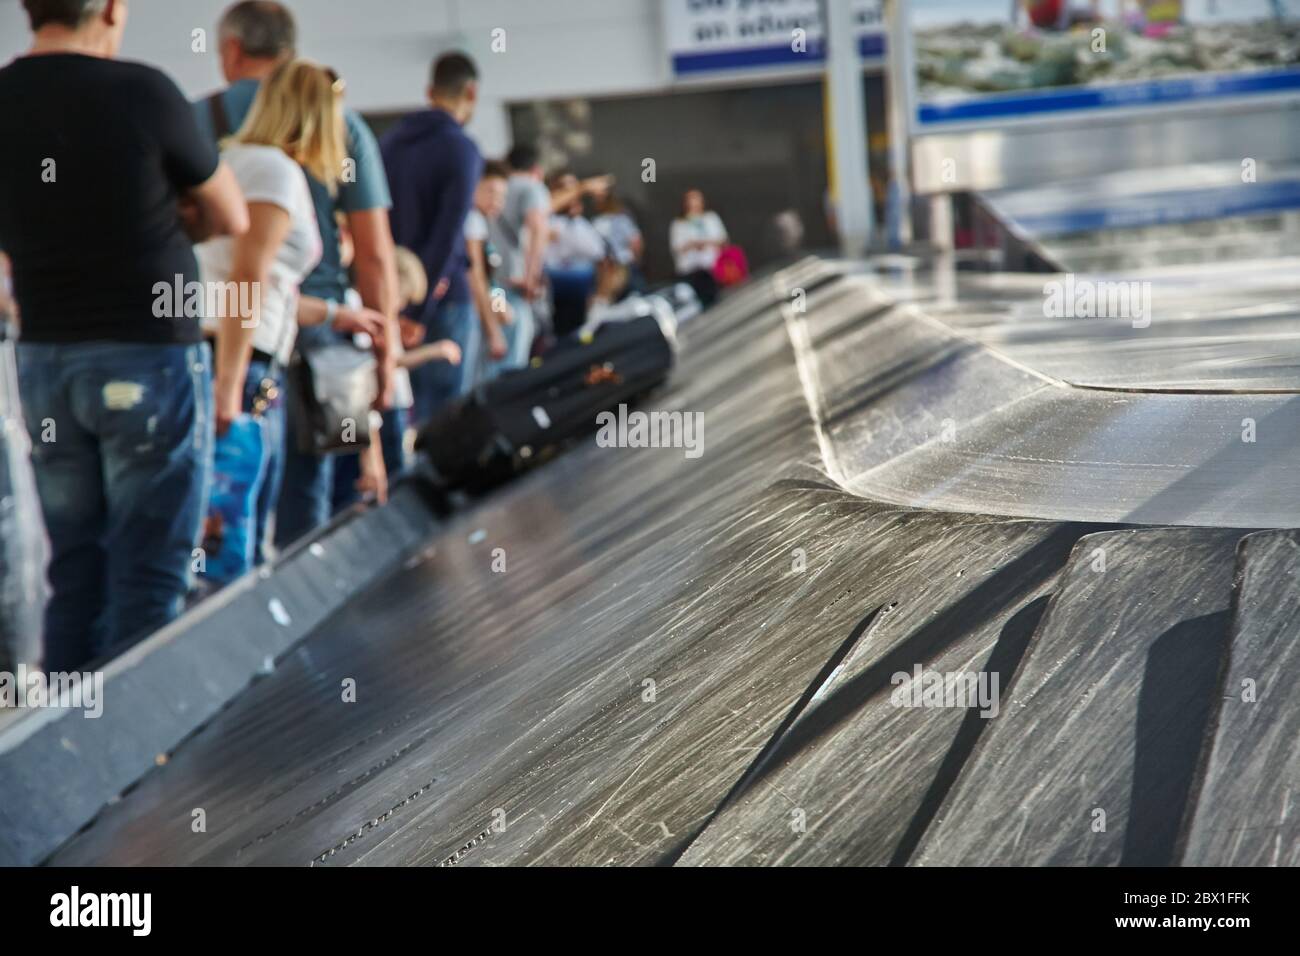 moving conveyor belt with suitcases at baggage claim at airport. Stock Photo